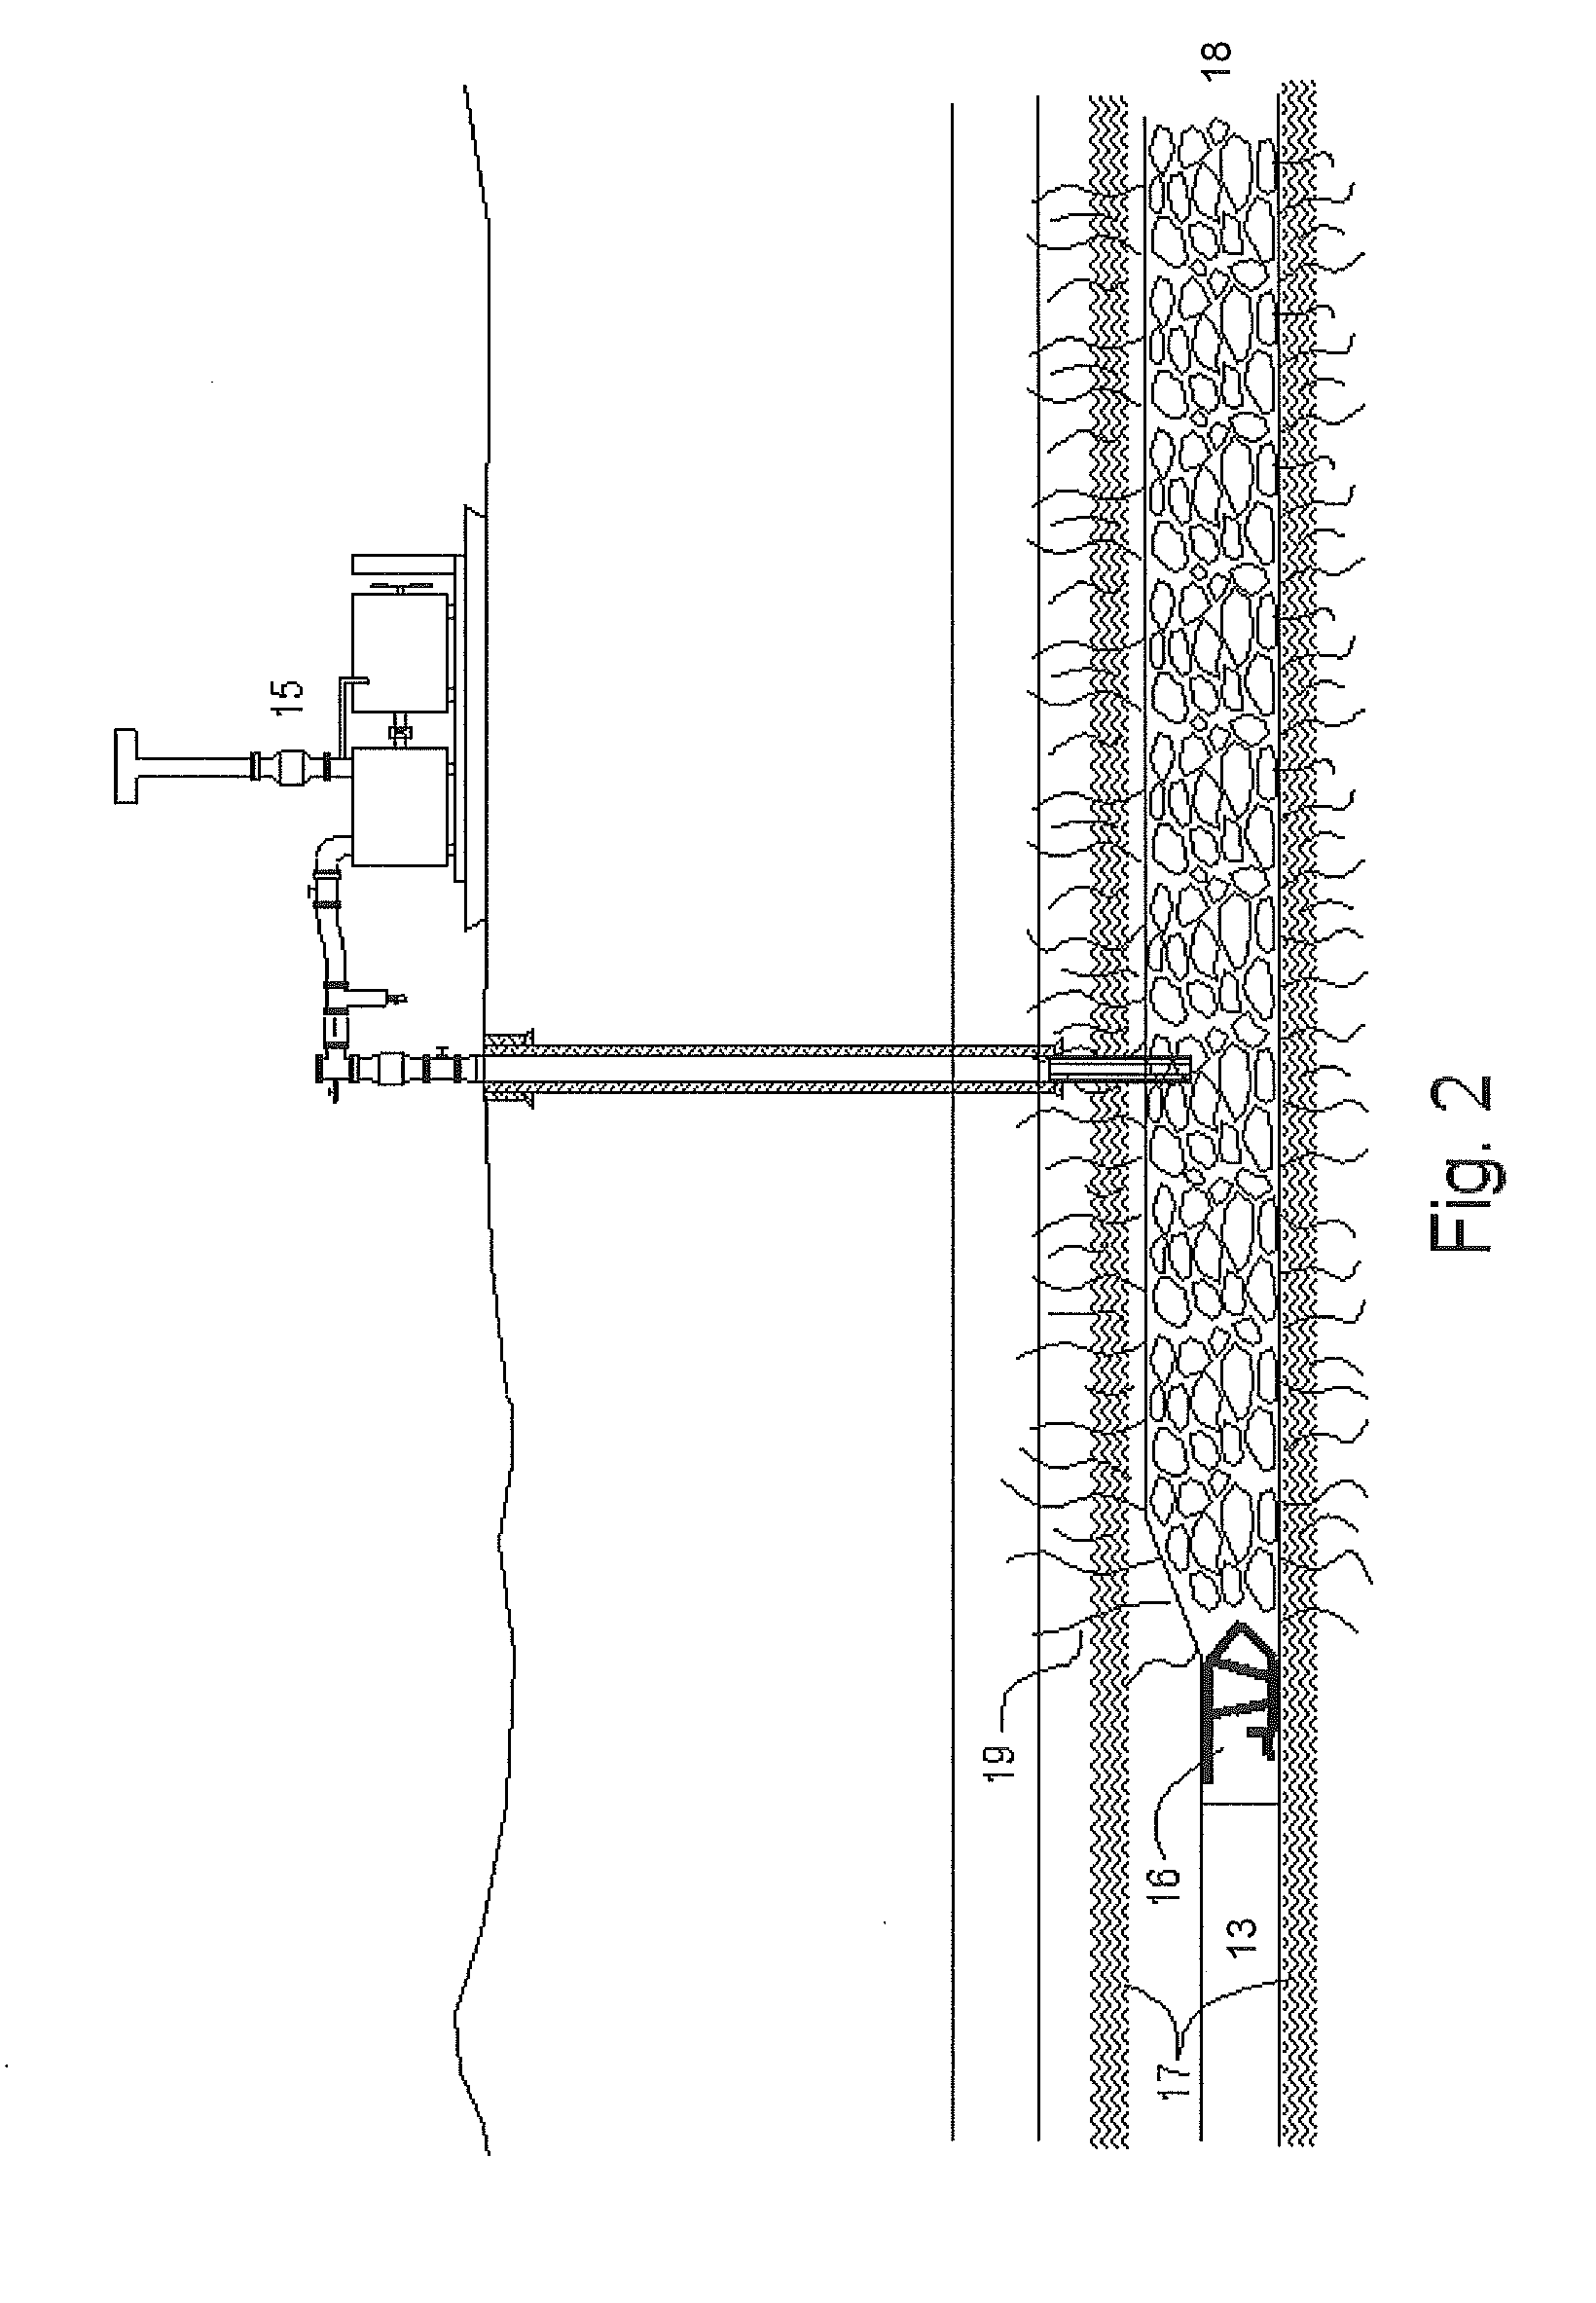 Mining method for co-extraction of non-combustible ore and mine methane